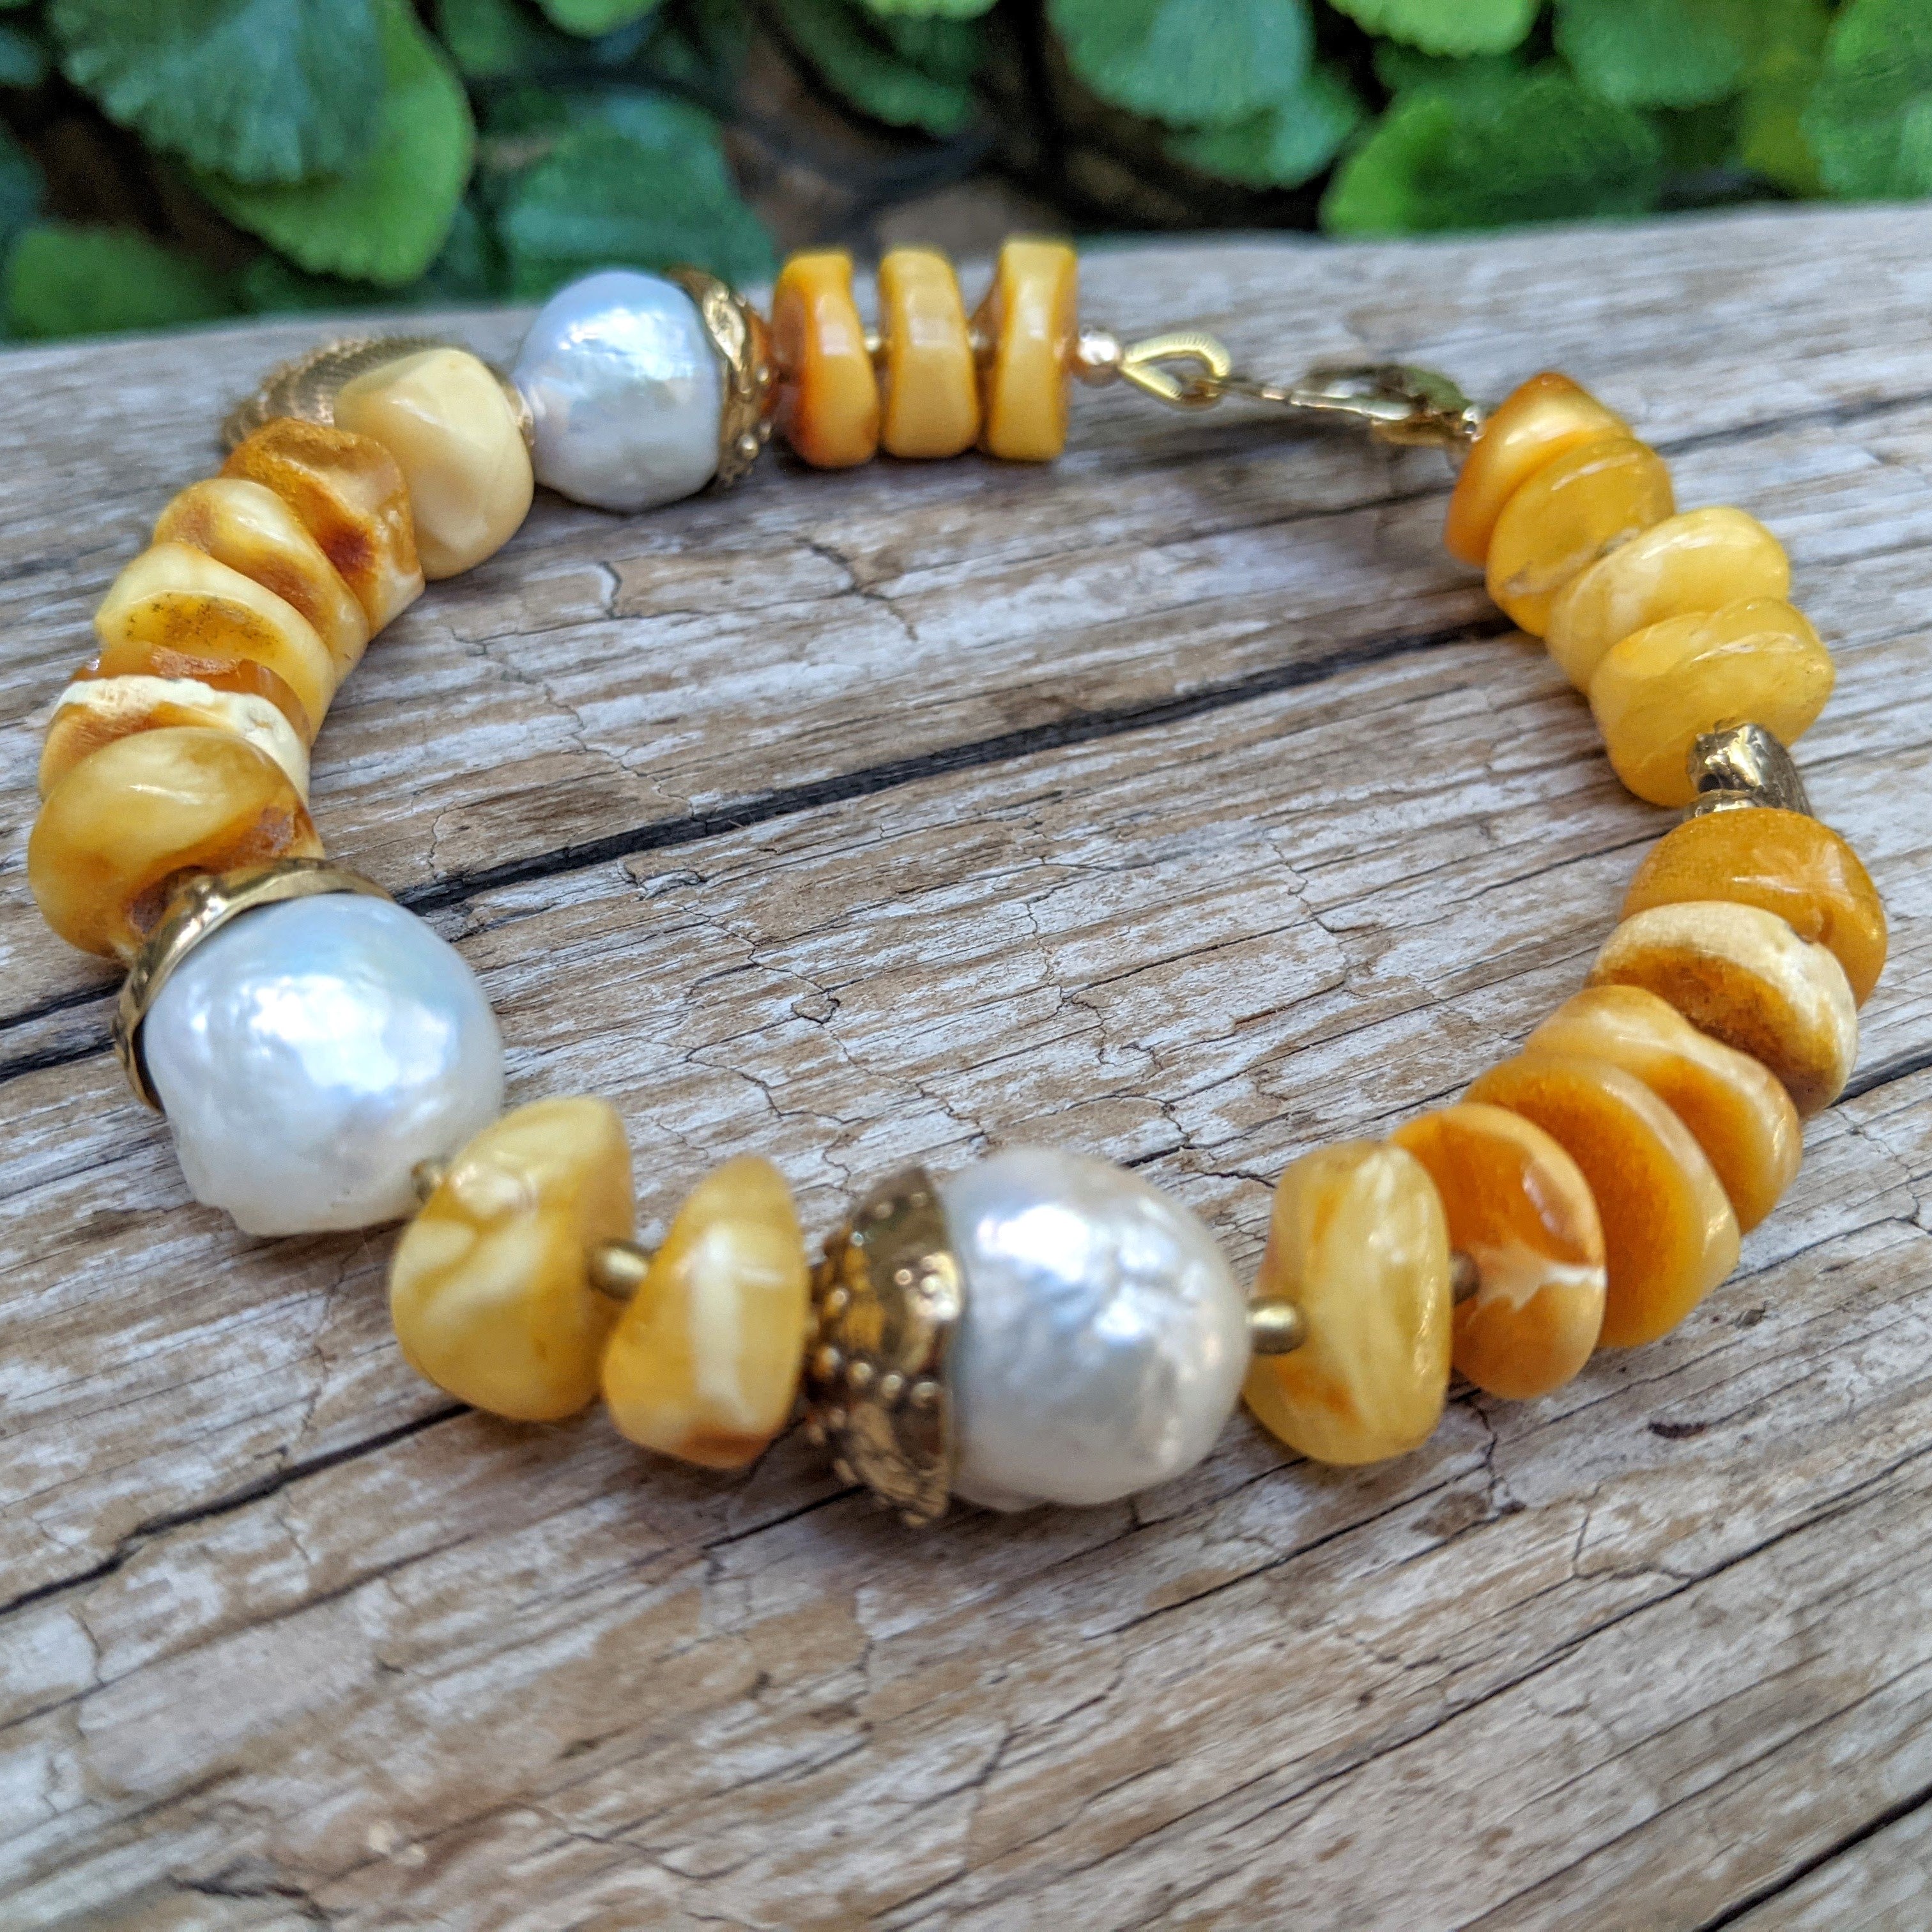 Chic and sunny amber bracelet with gold bronze sea shell and urchin created by Aurora Creative Jewellery.